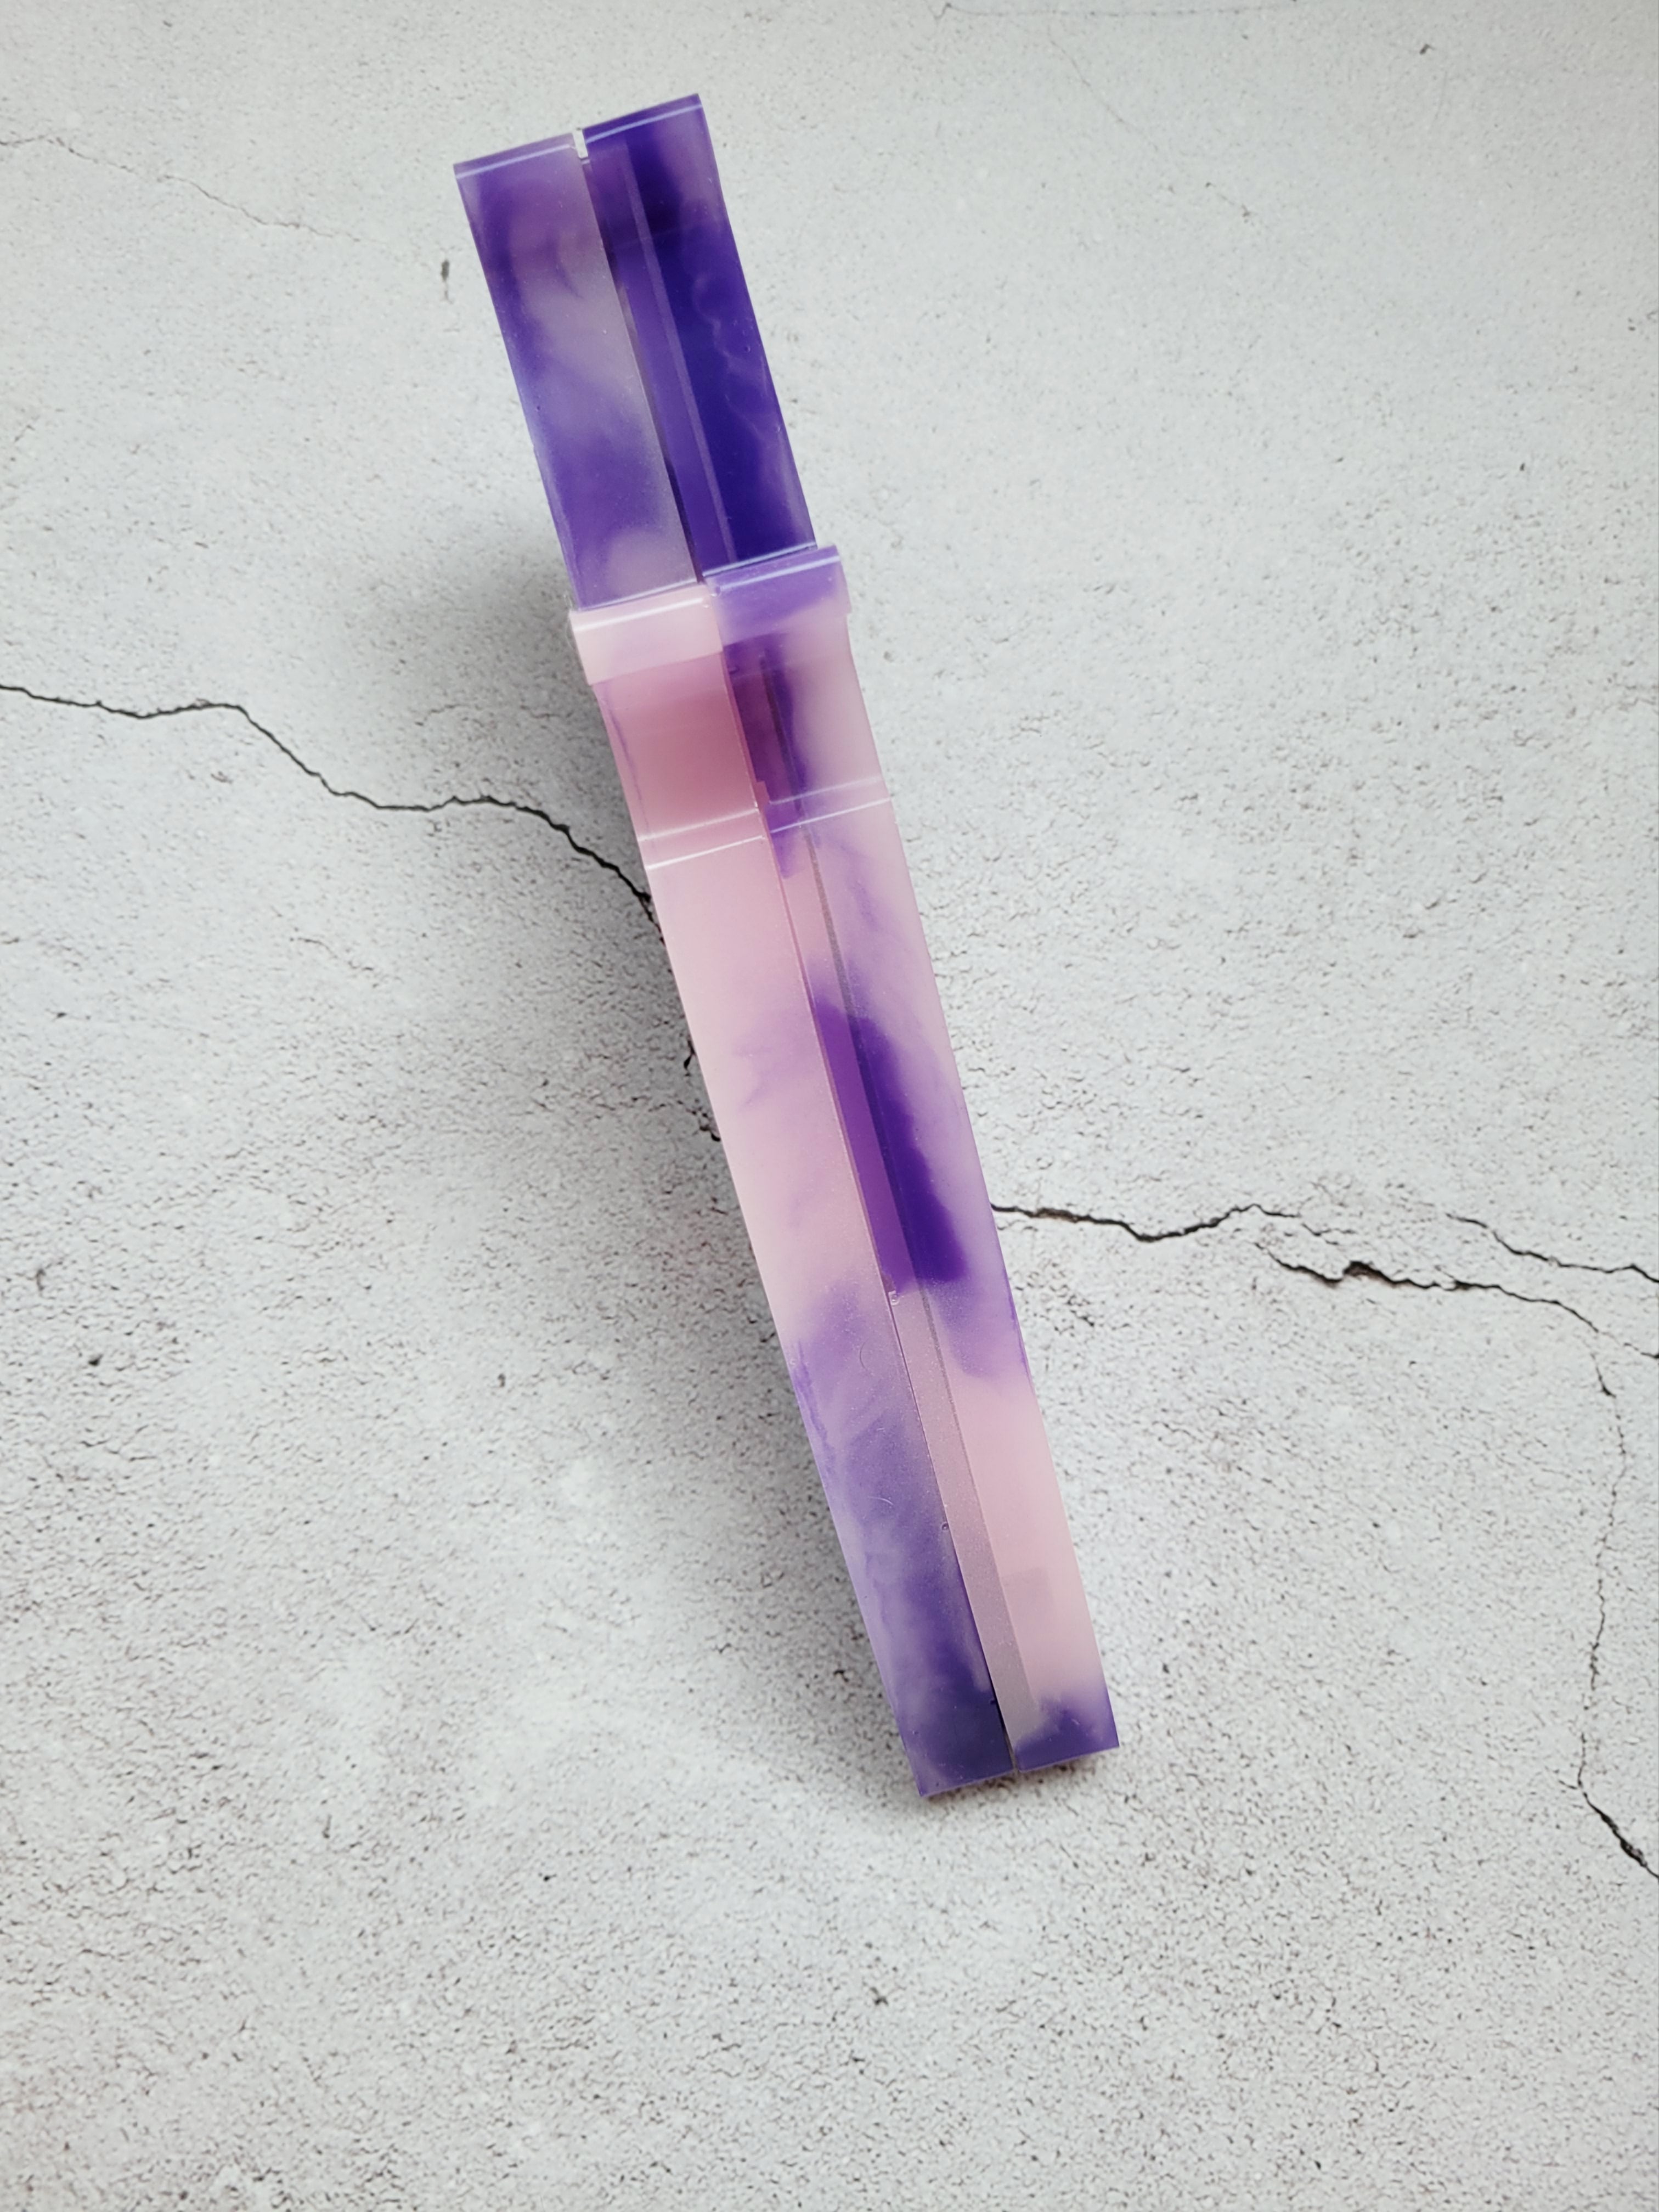 resin dice dagger. It's dark purple and light pink swirled together. Side view